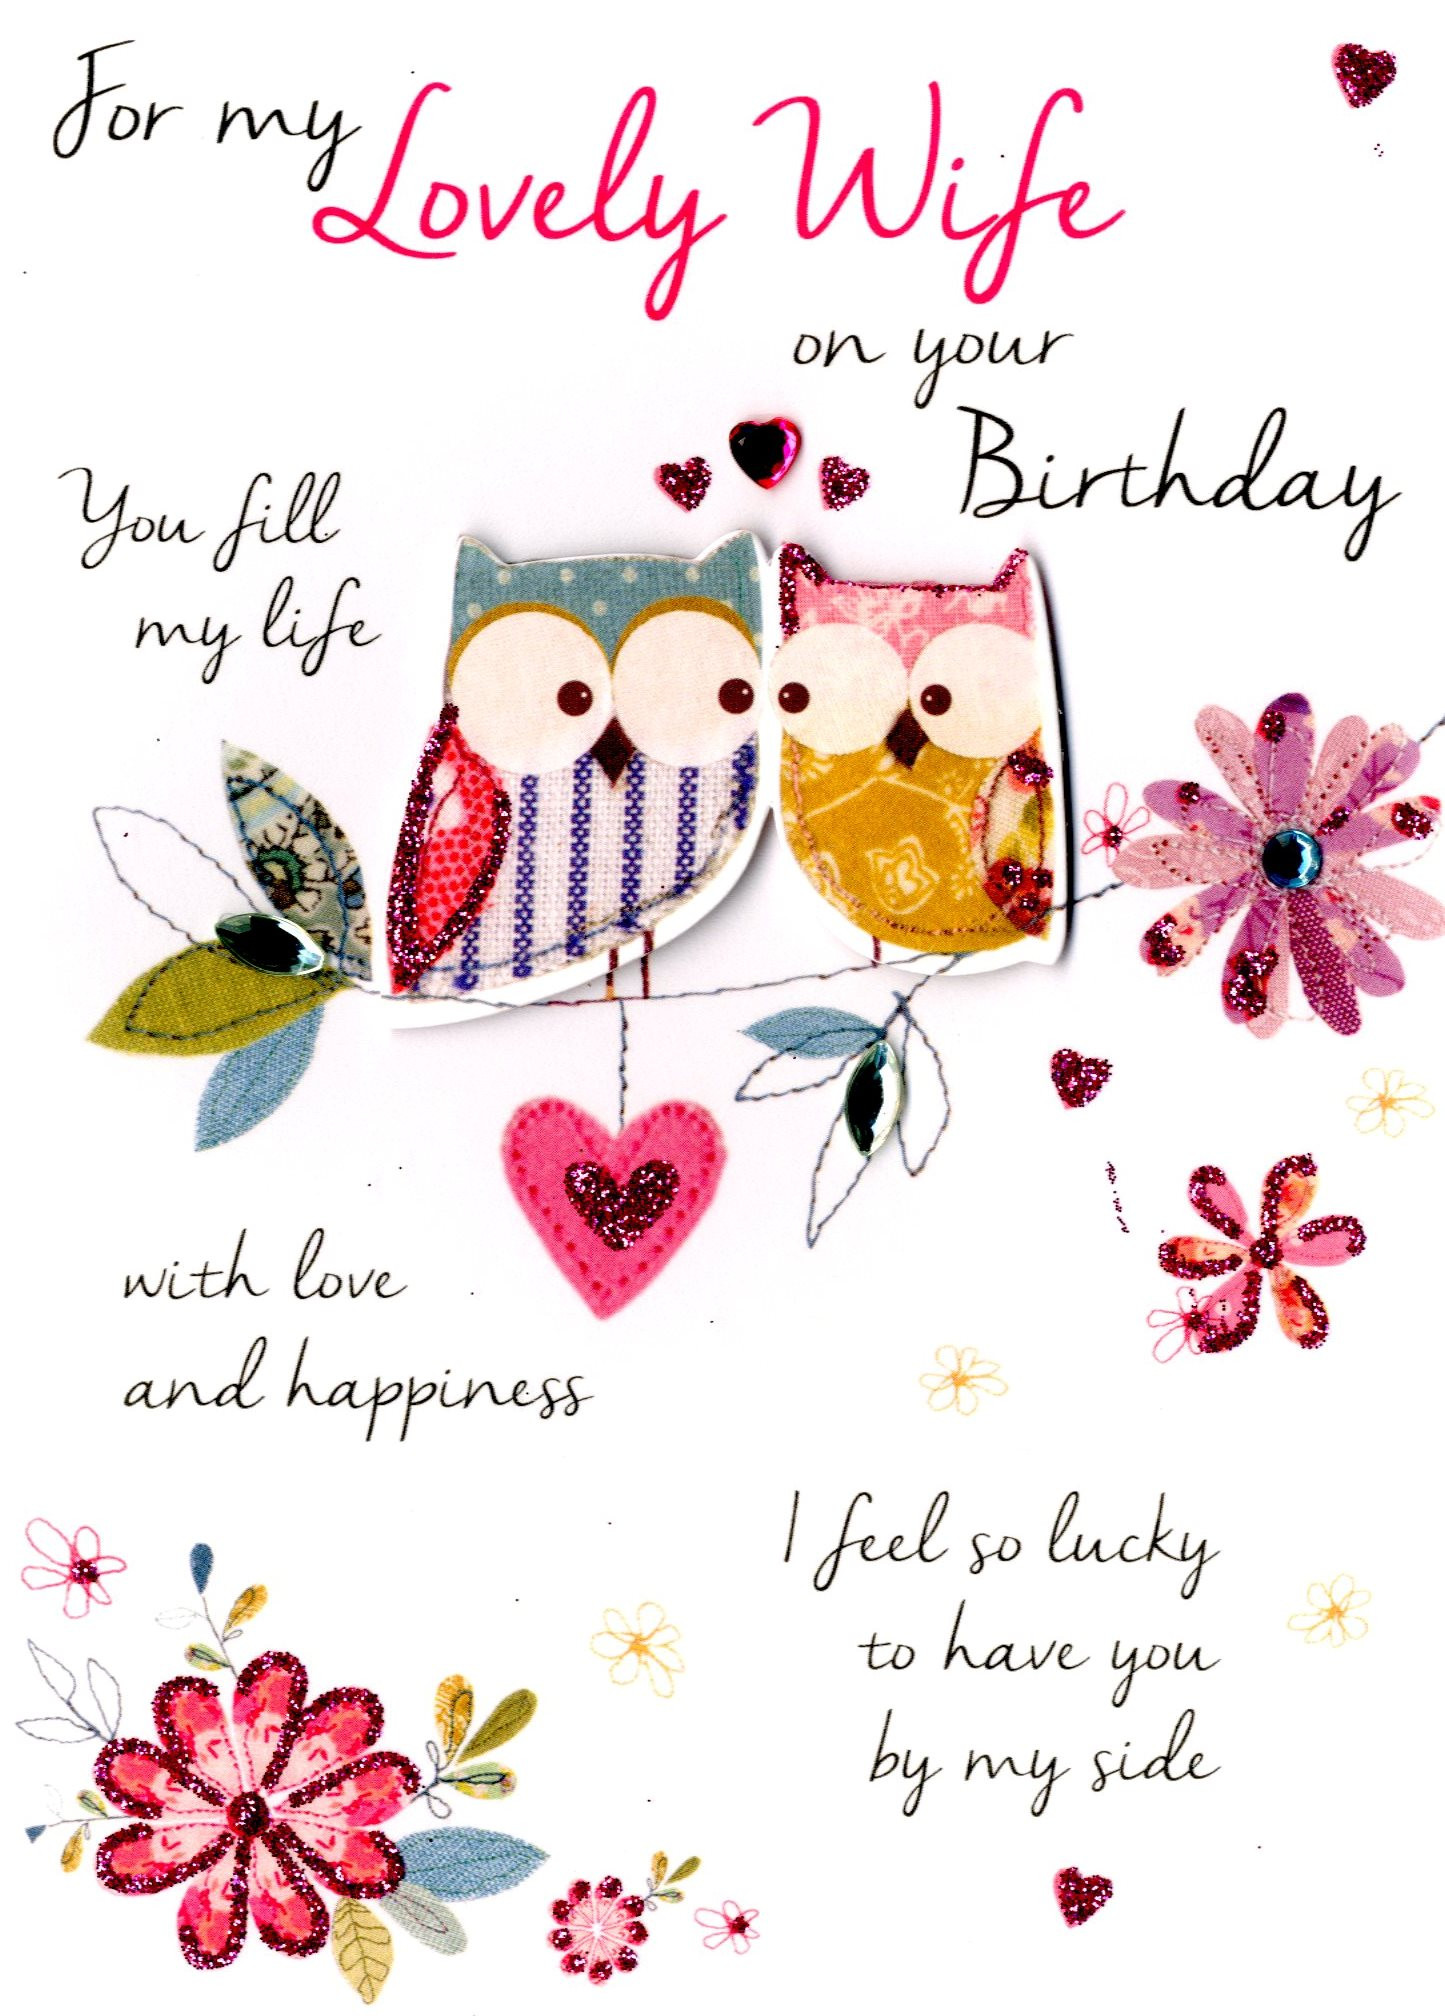 The Best Wife Birthday Card Message Home, Family, Style and Art Ideas